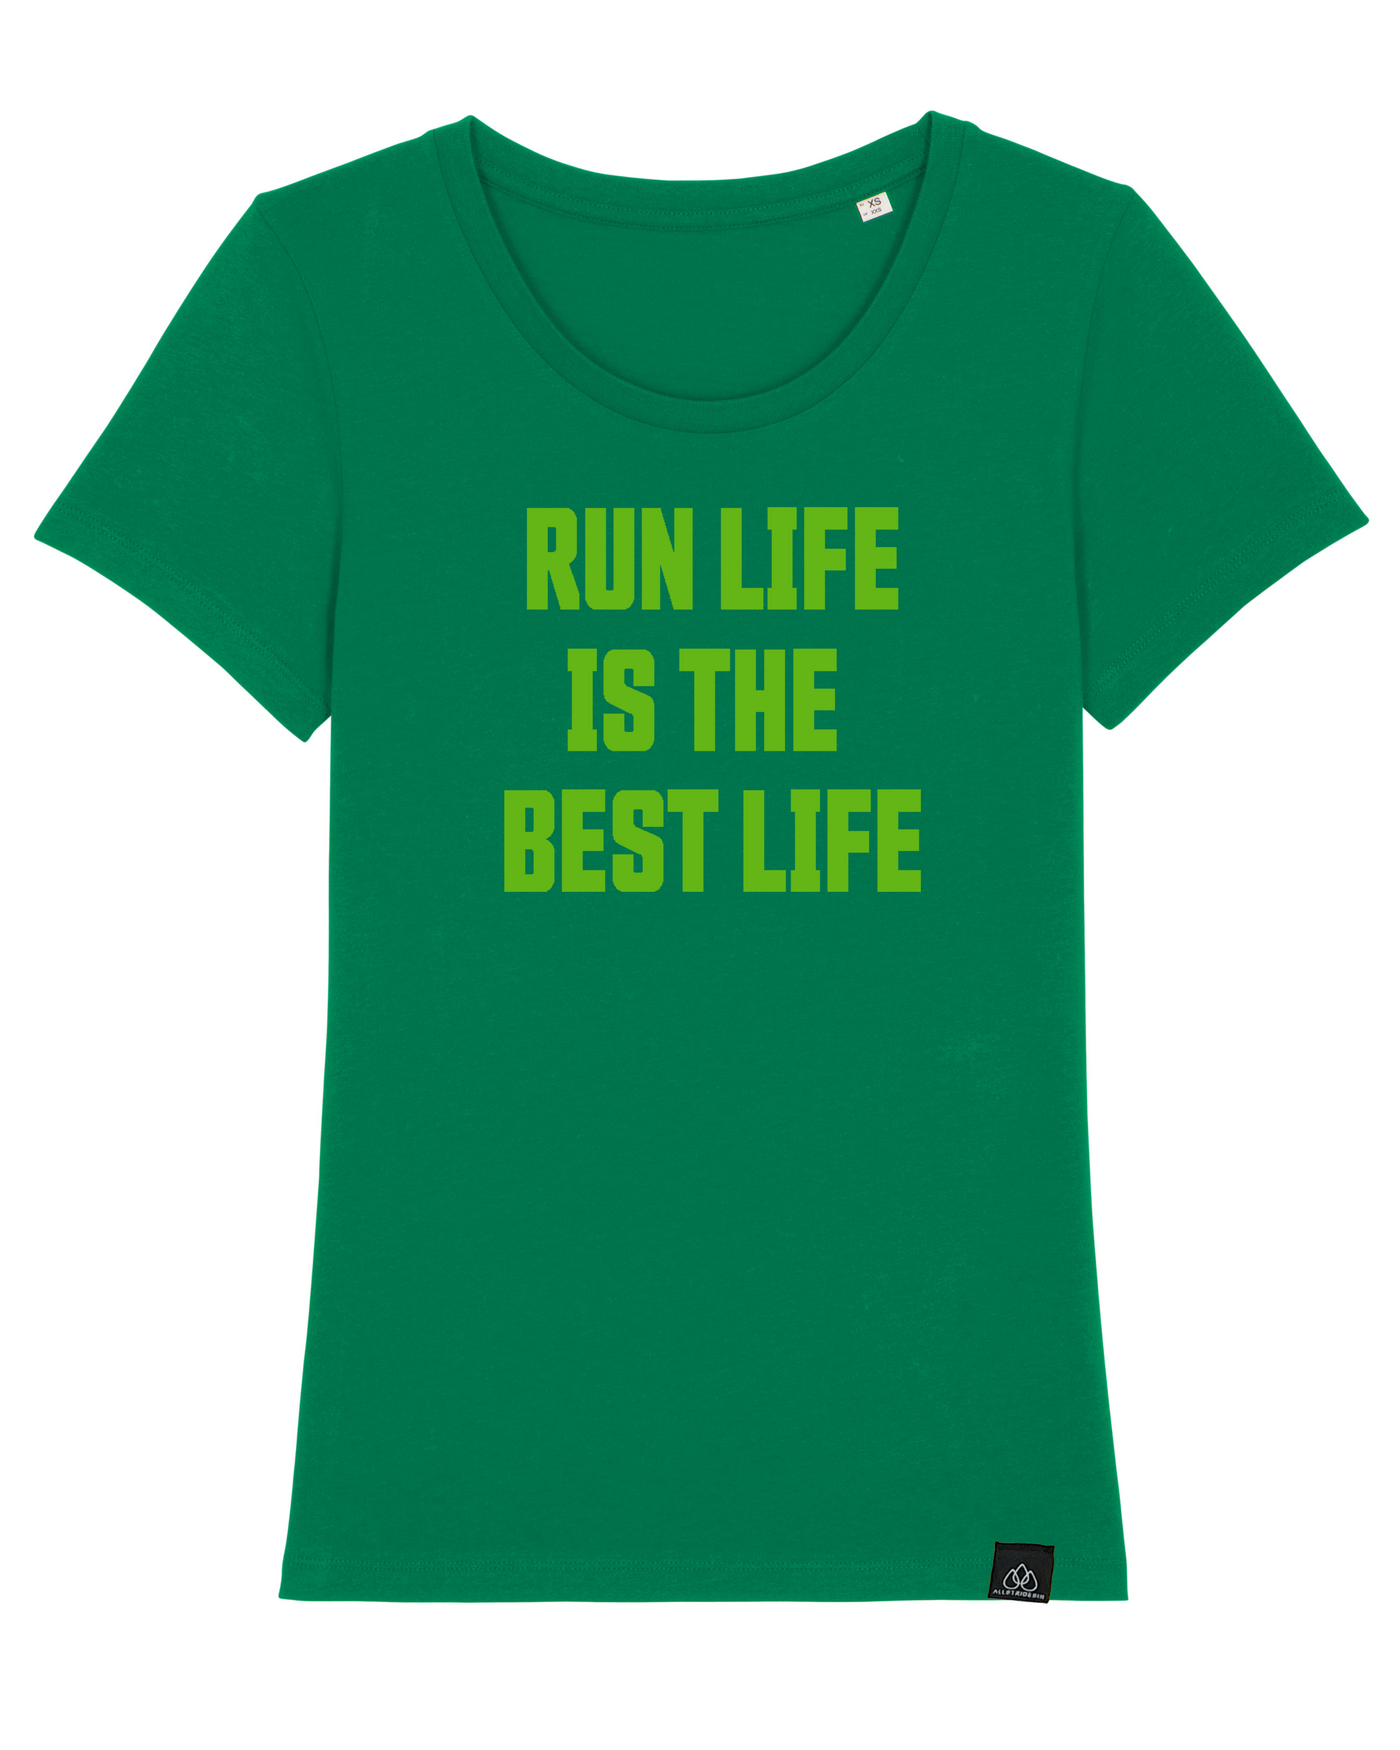 RUN LIFE IS THE BEST LIFE - ICONIC LADY T-SHIRT | ALLSTRIDESIN®